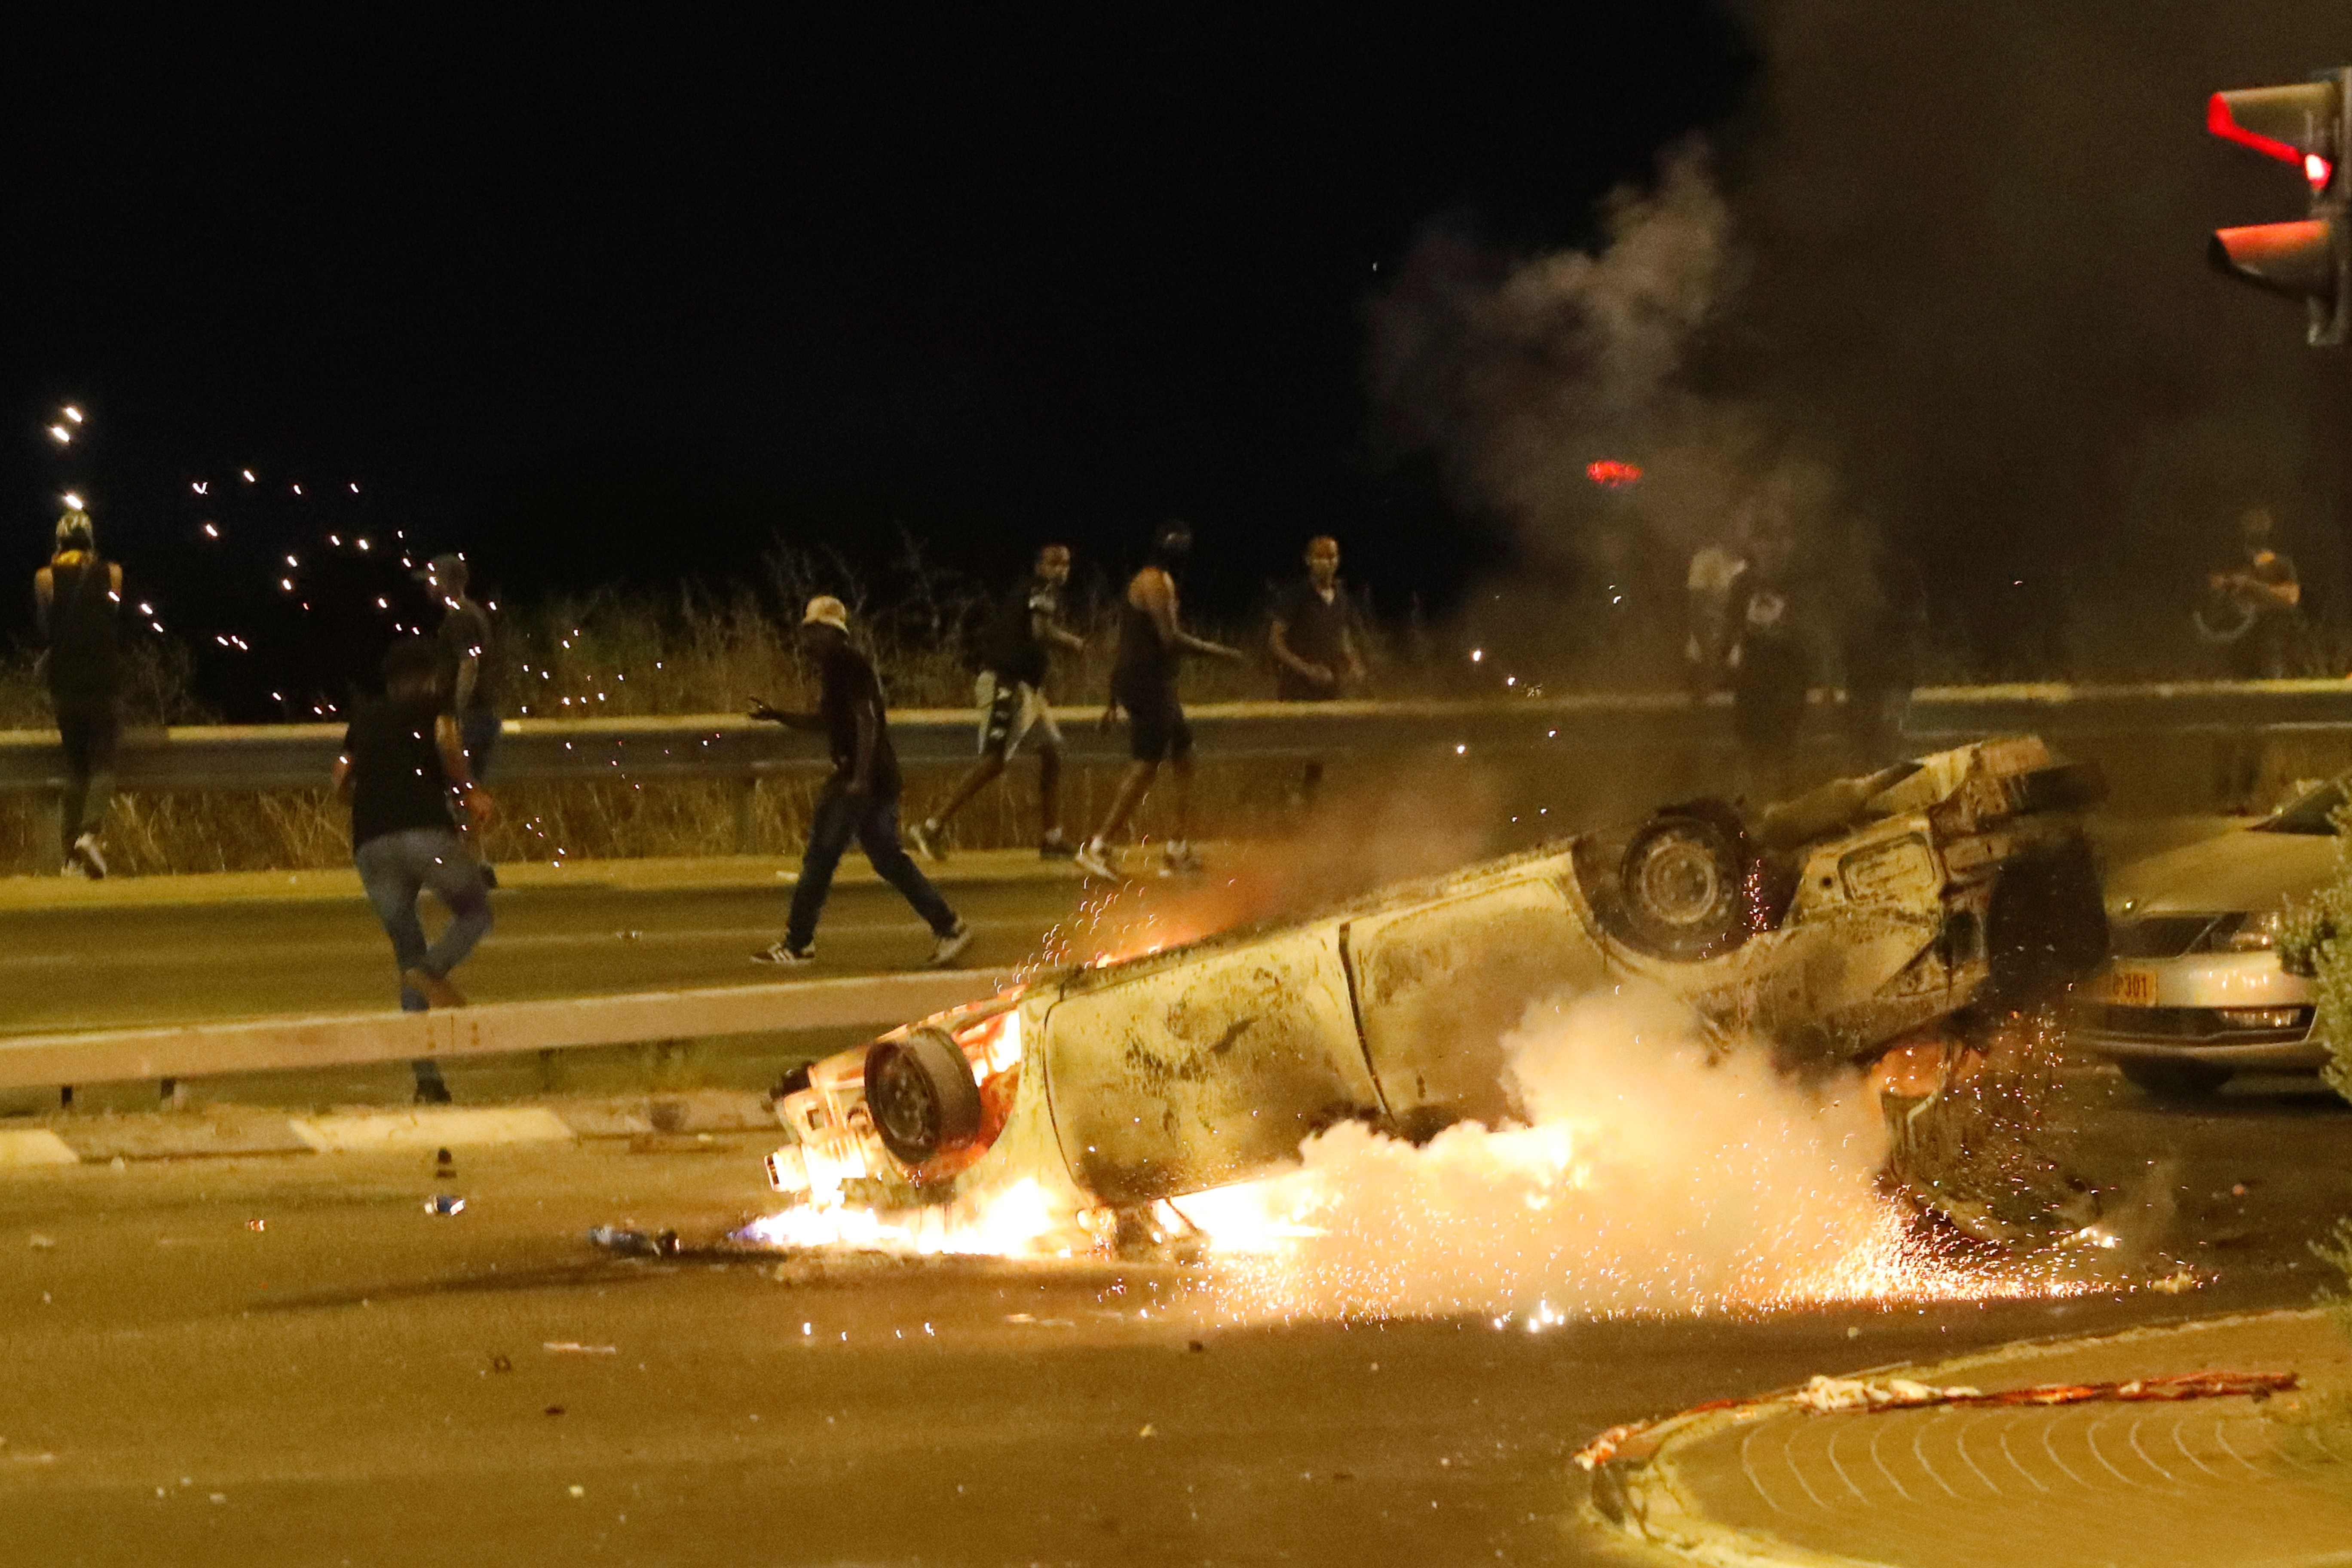 Members of the Ethiopian community of Israel clash with the police during in the Israeli coastal city of Netanya on July 2, 2019, during a protest against the killing of Solomon Tekah, a young man of Ethiopian origin, who was killed by an off-duty police officer. Angry protesters clashed with Israeli police on July 2 over an off-duty officer's killing of a young man of Ethiopian origin, as the incident drew fresh accusations of racism. Crowds of Ethiopian Israelis battled police and blocked highways on at least 15 junctions across the country, with 47 officers wounded and 60 demonstrators detained, according to a police statement. Solomon Teka, reportedly 18 or 19, was buried on July 2, after he was shot dead in Kiryat Haim, a town near the northern port city of Haifa, late Sunday. / AFP / JACK GUEZ